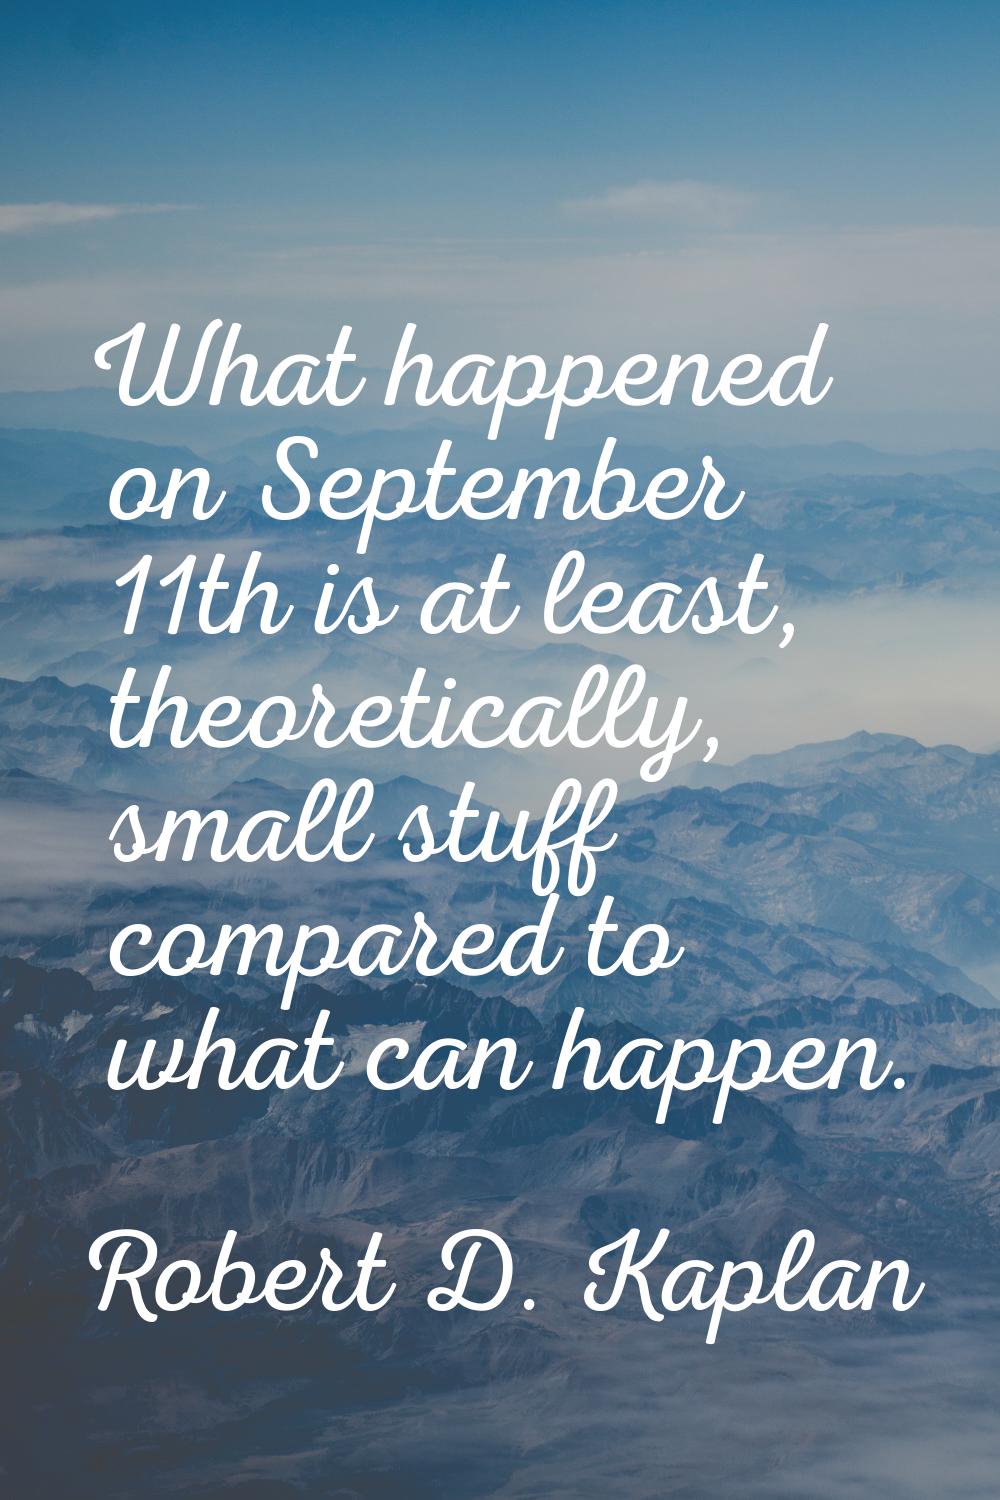 What happened on September 11th is at least, theoretically, small stuff compared to what can happen